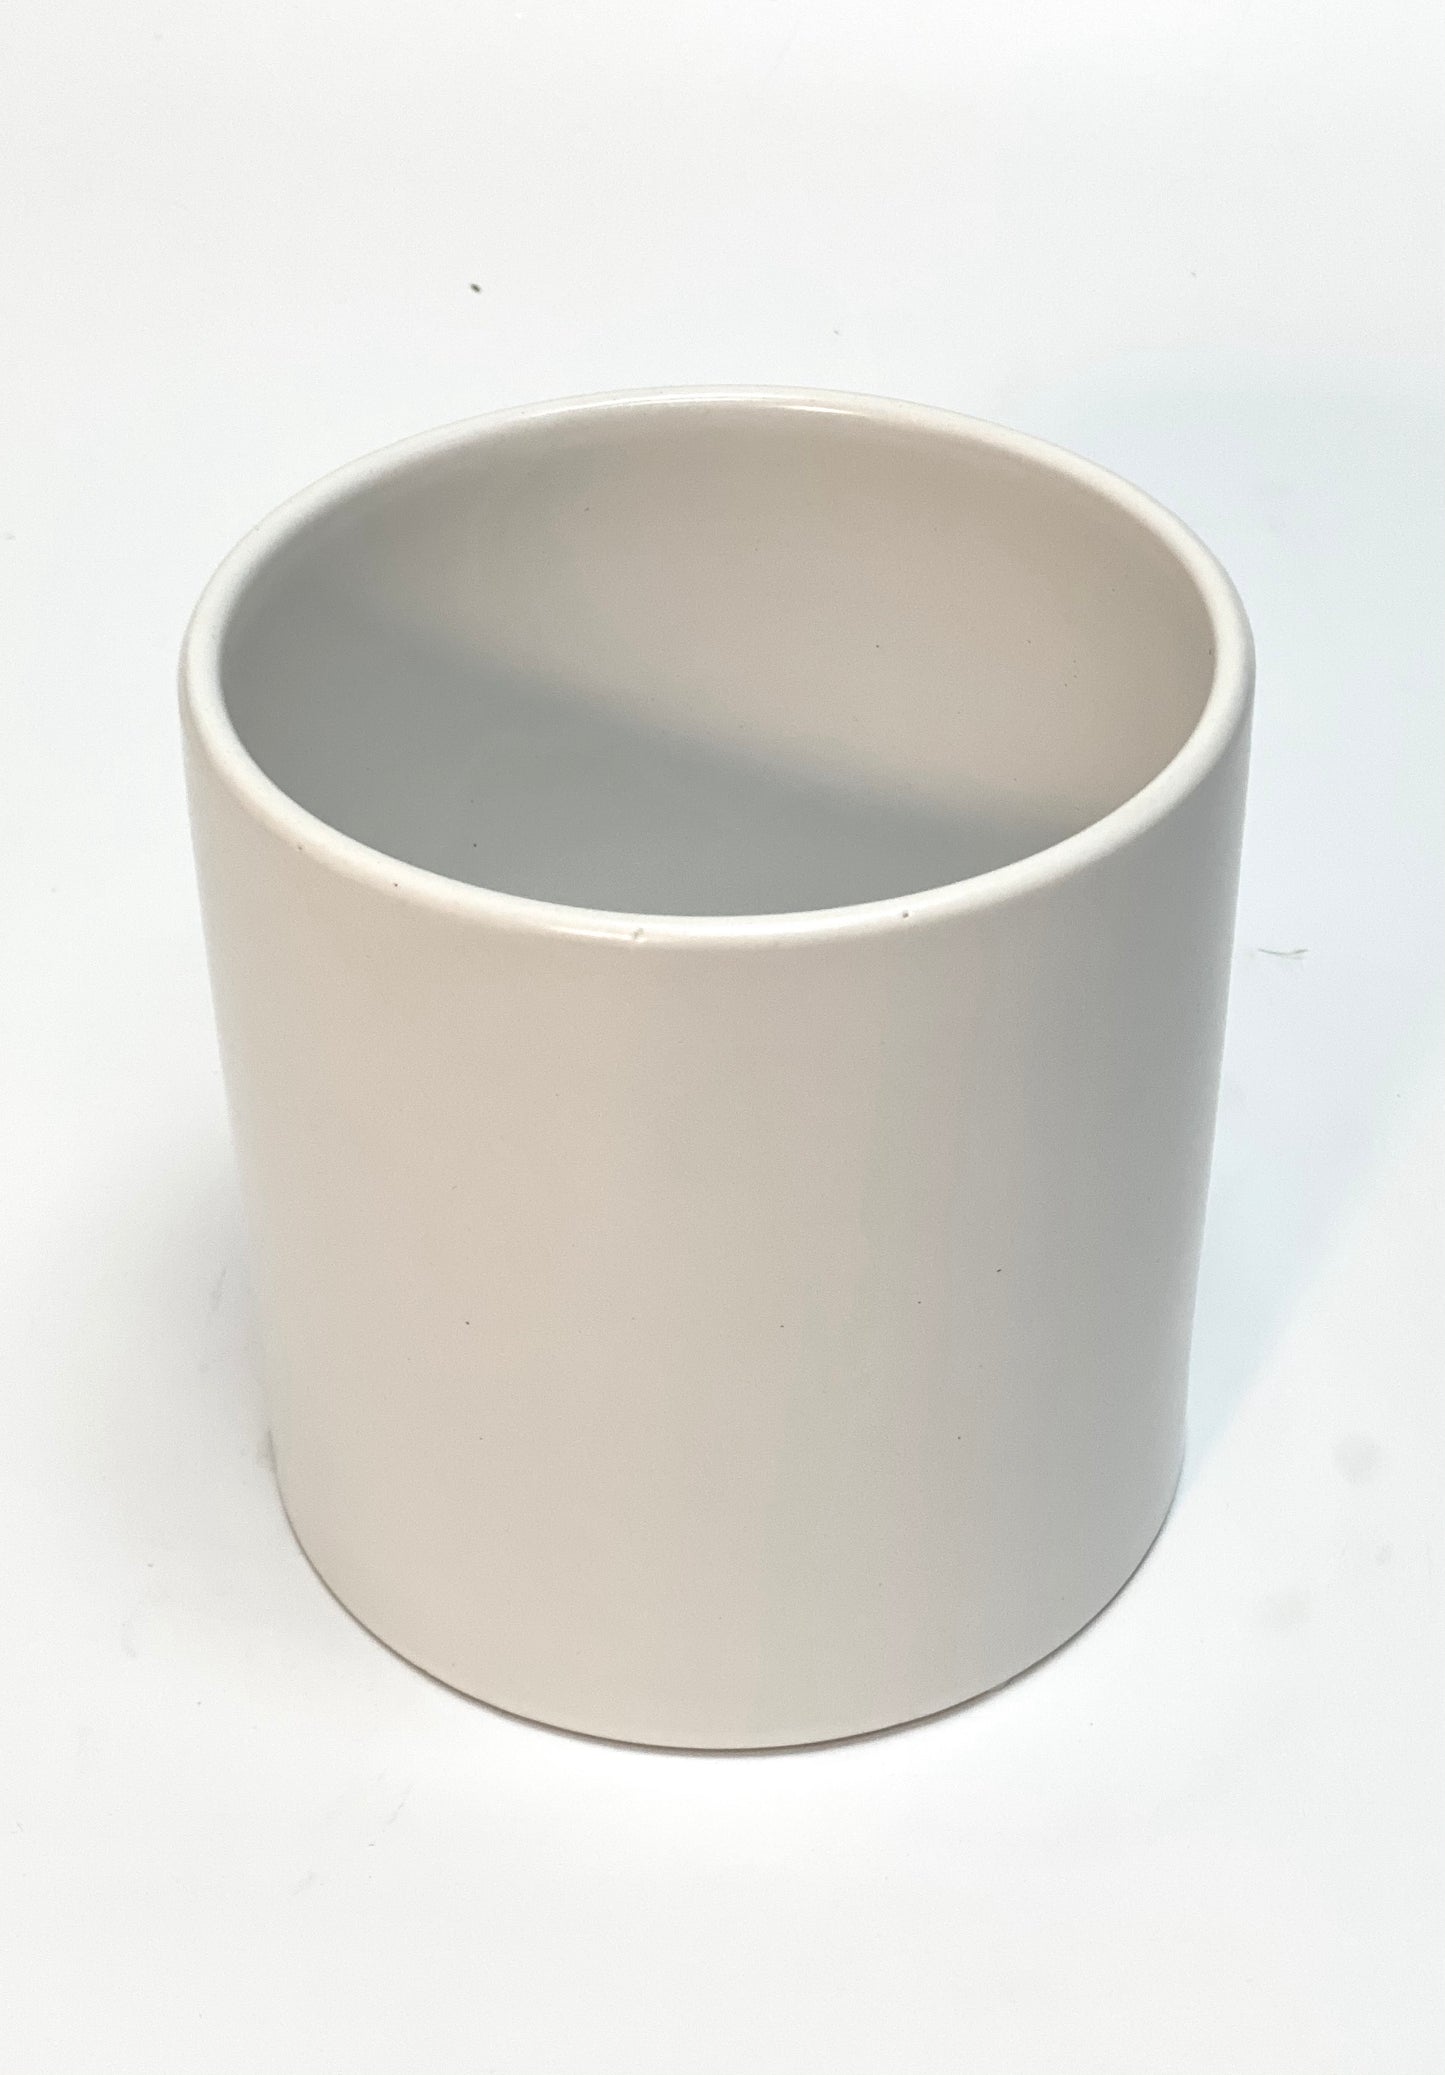 Small Cylinder - 6" Tall